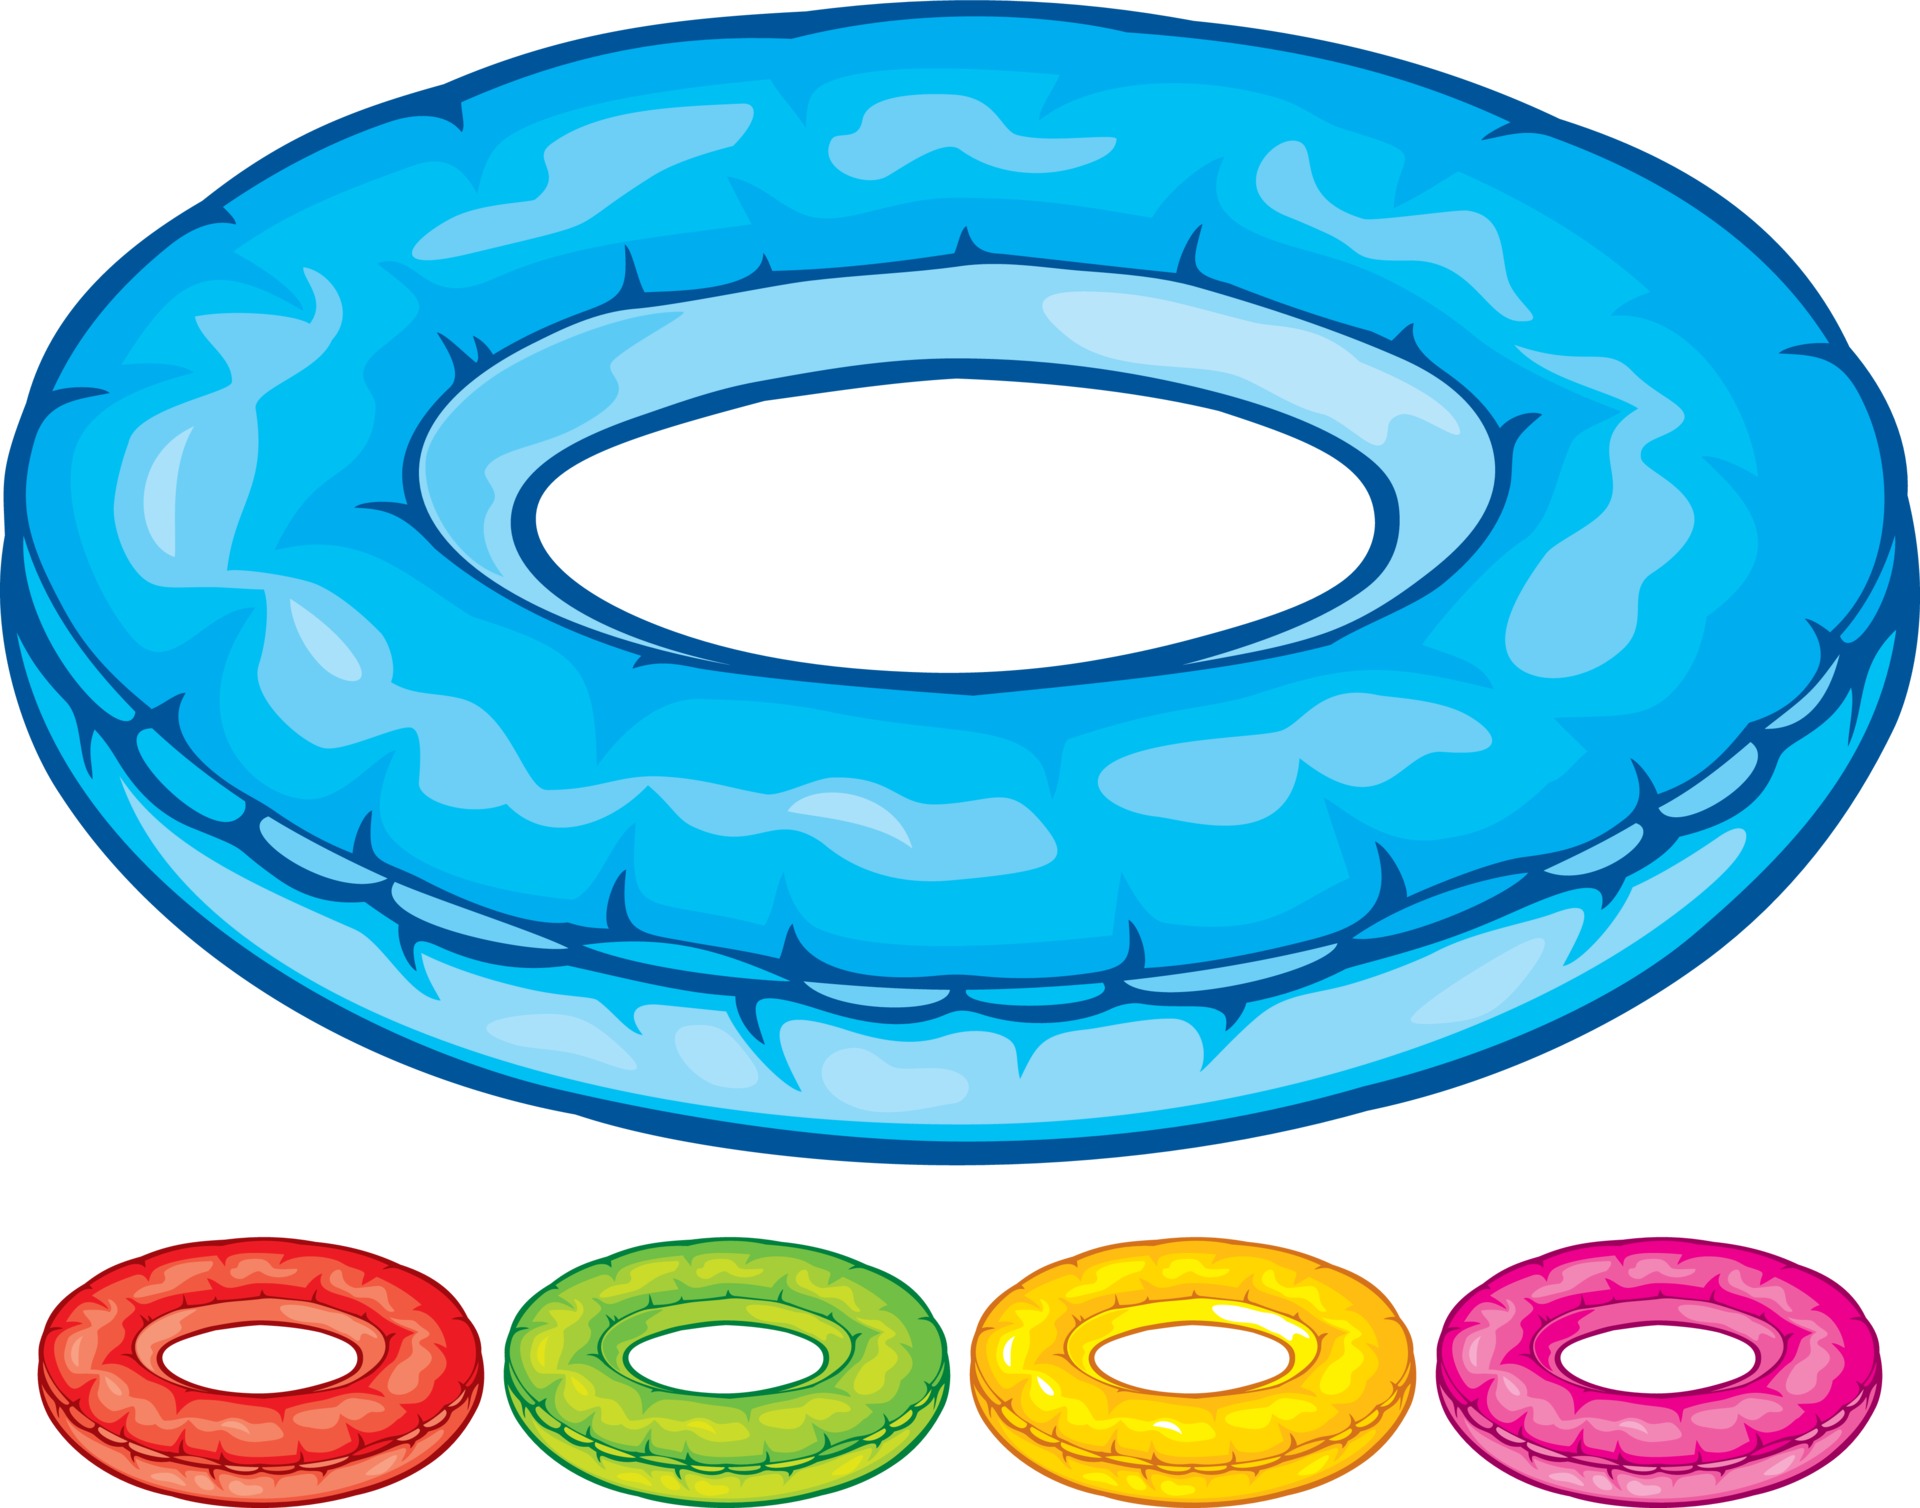 Download the Pool Round Tube 3196104